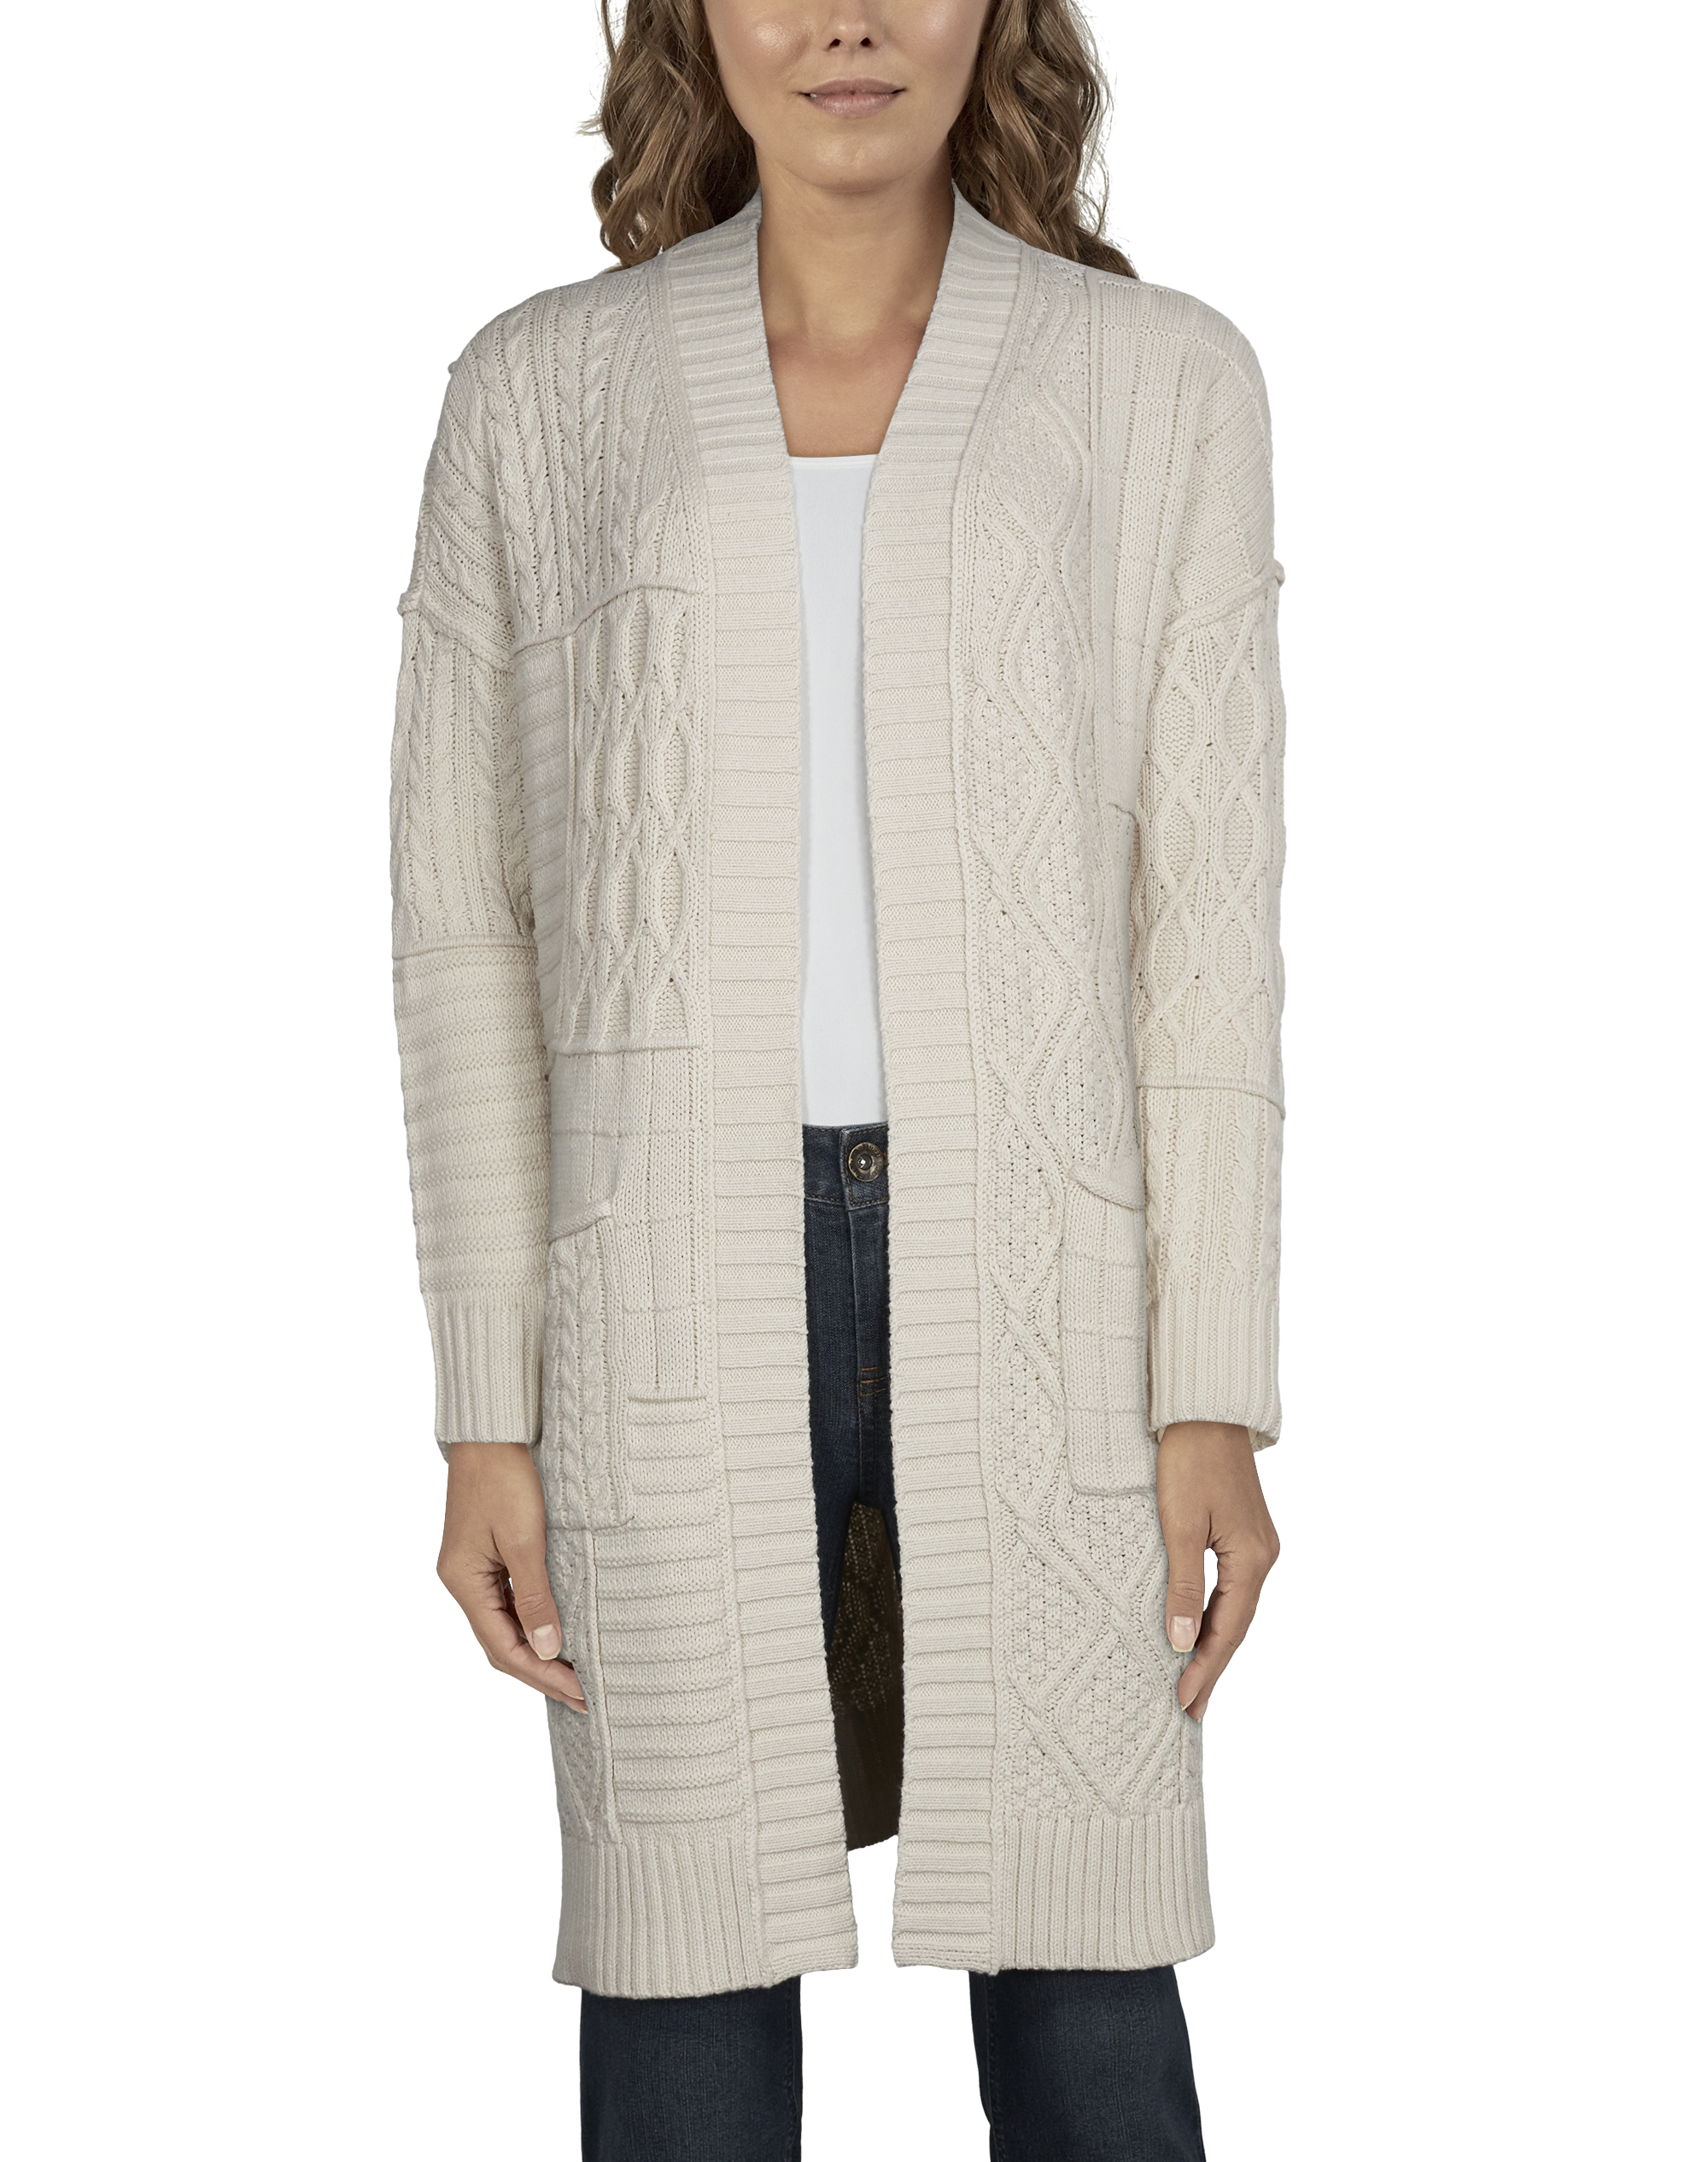 Natural Reflections Mixed-Stitch Cardigan for Ladies | Bass Pro Shops